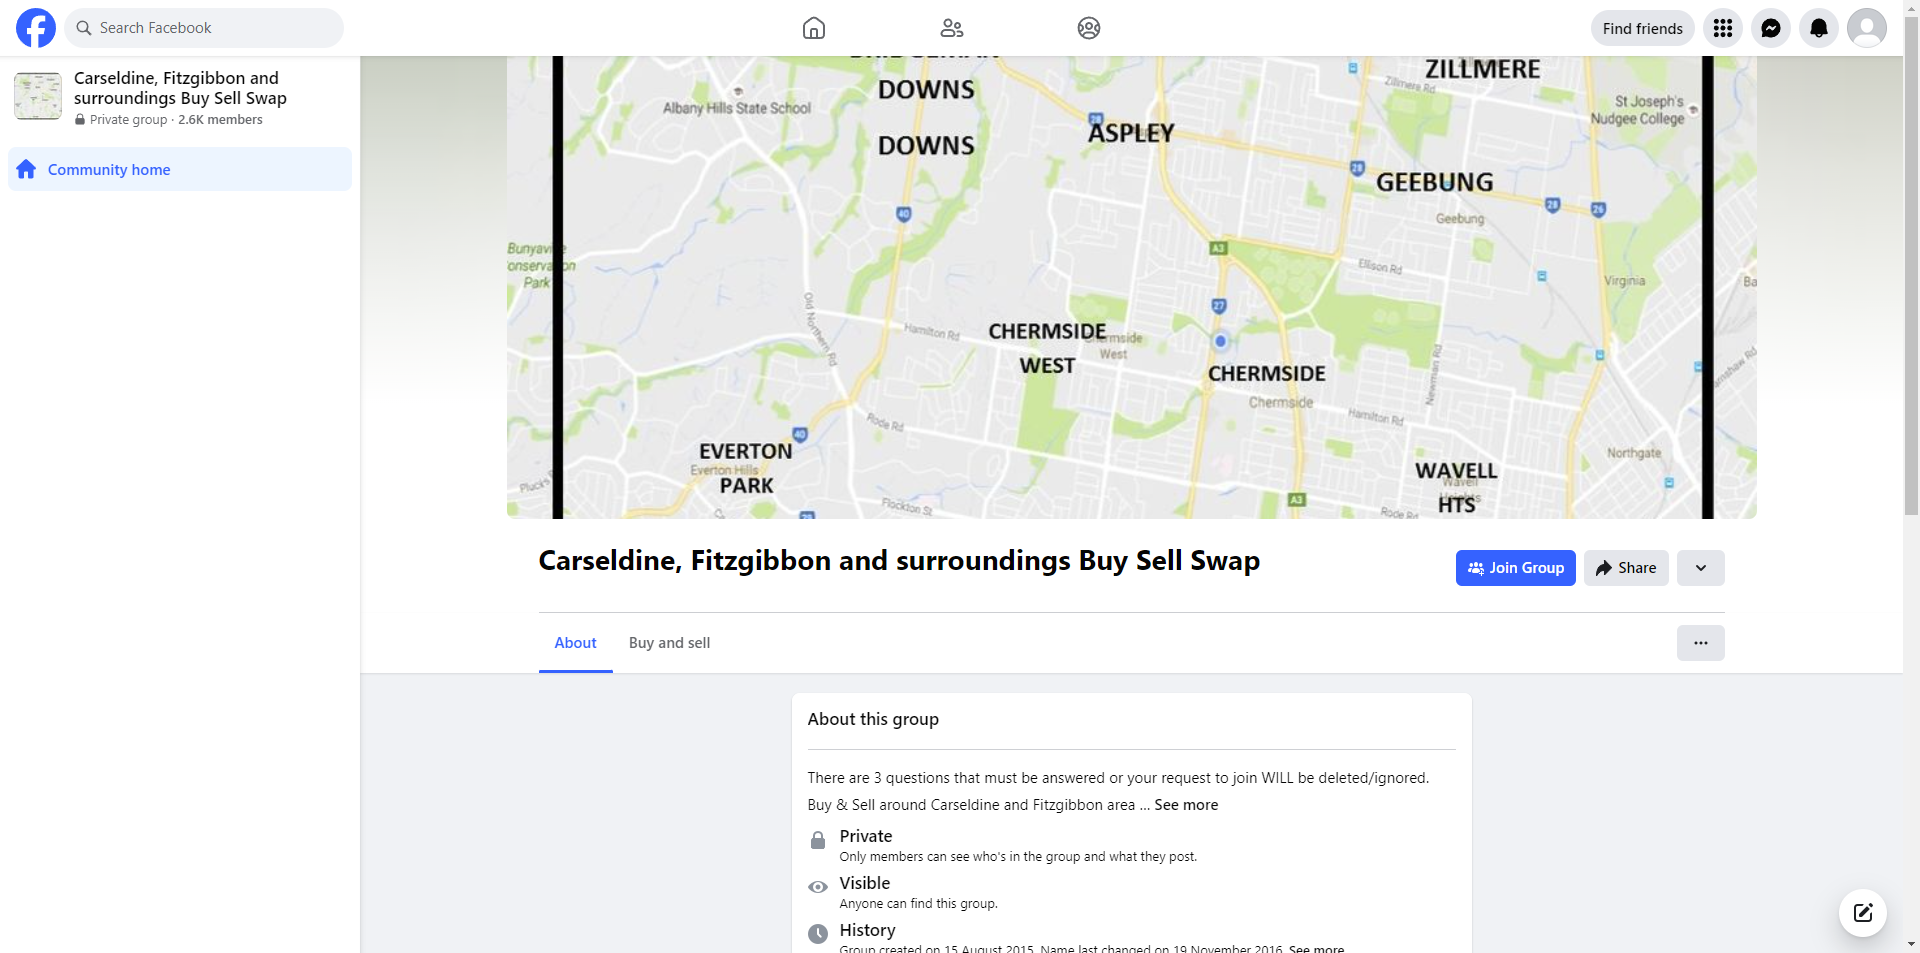 Carseldine, Fitzgibbon and Surroundings Buy Sell Swap